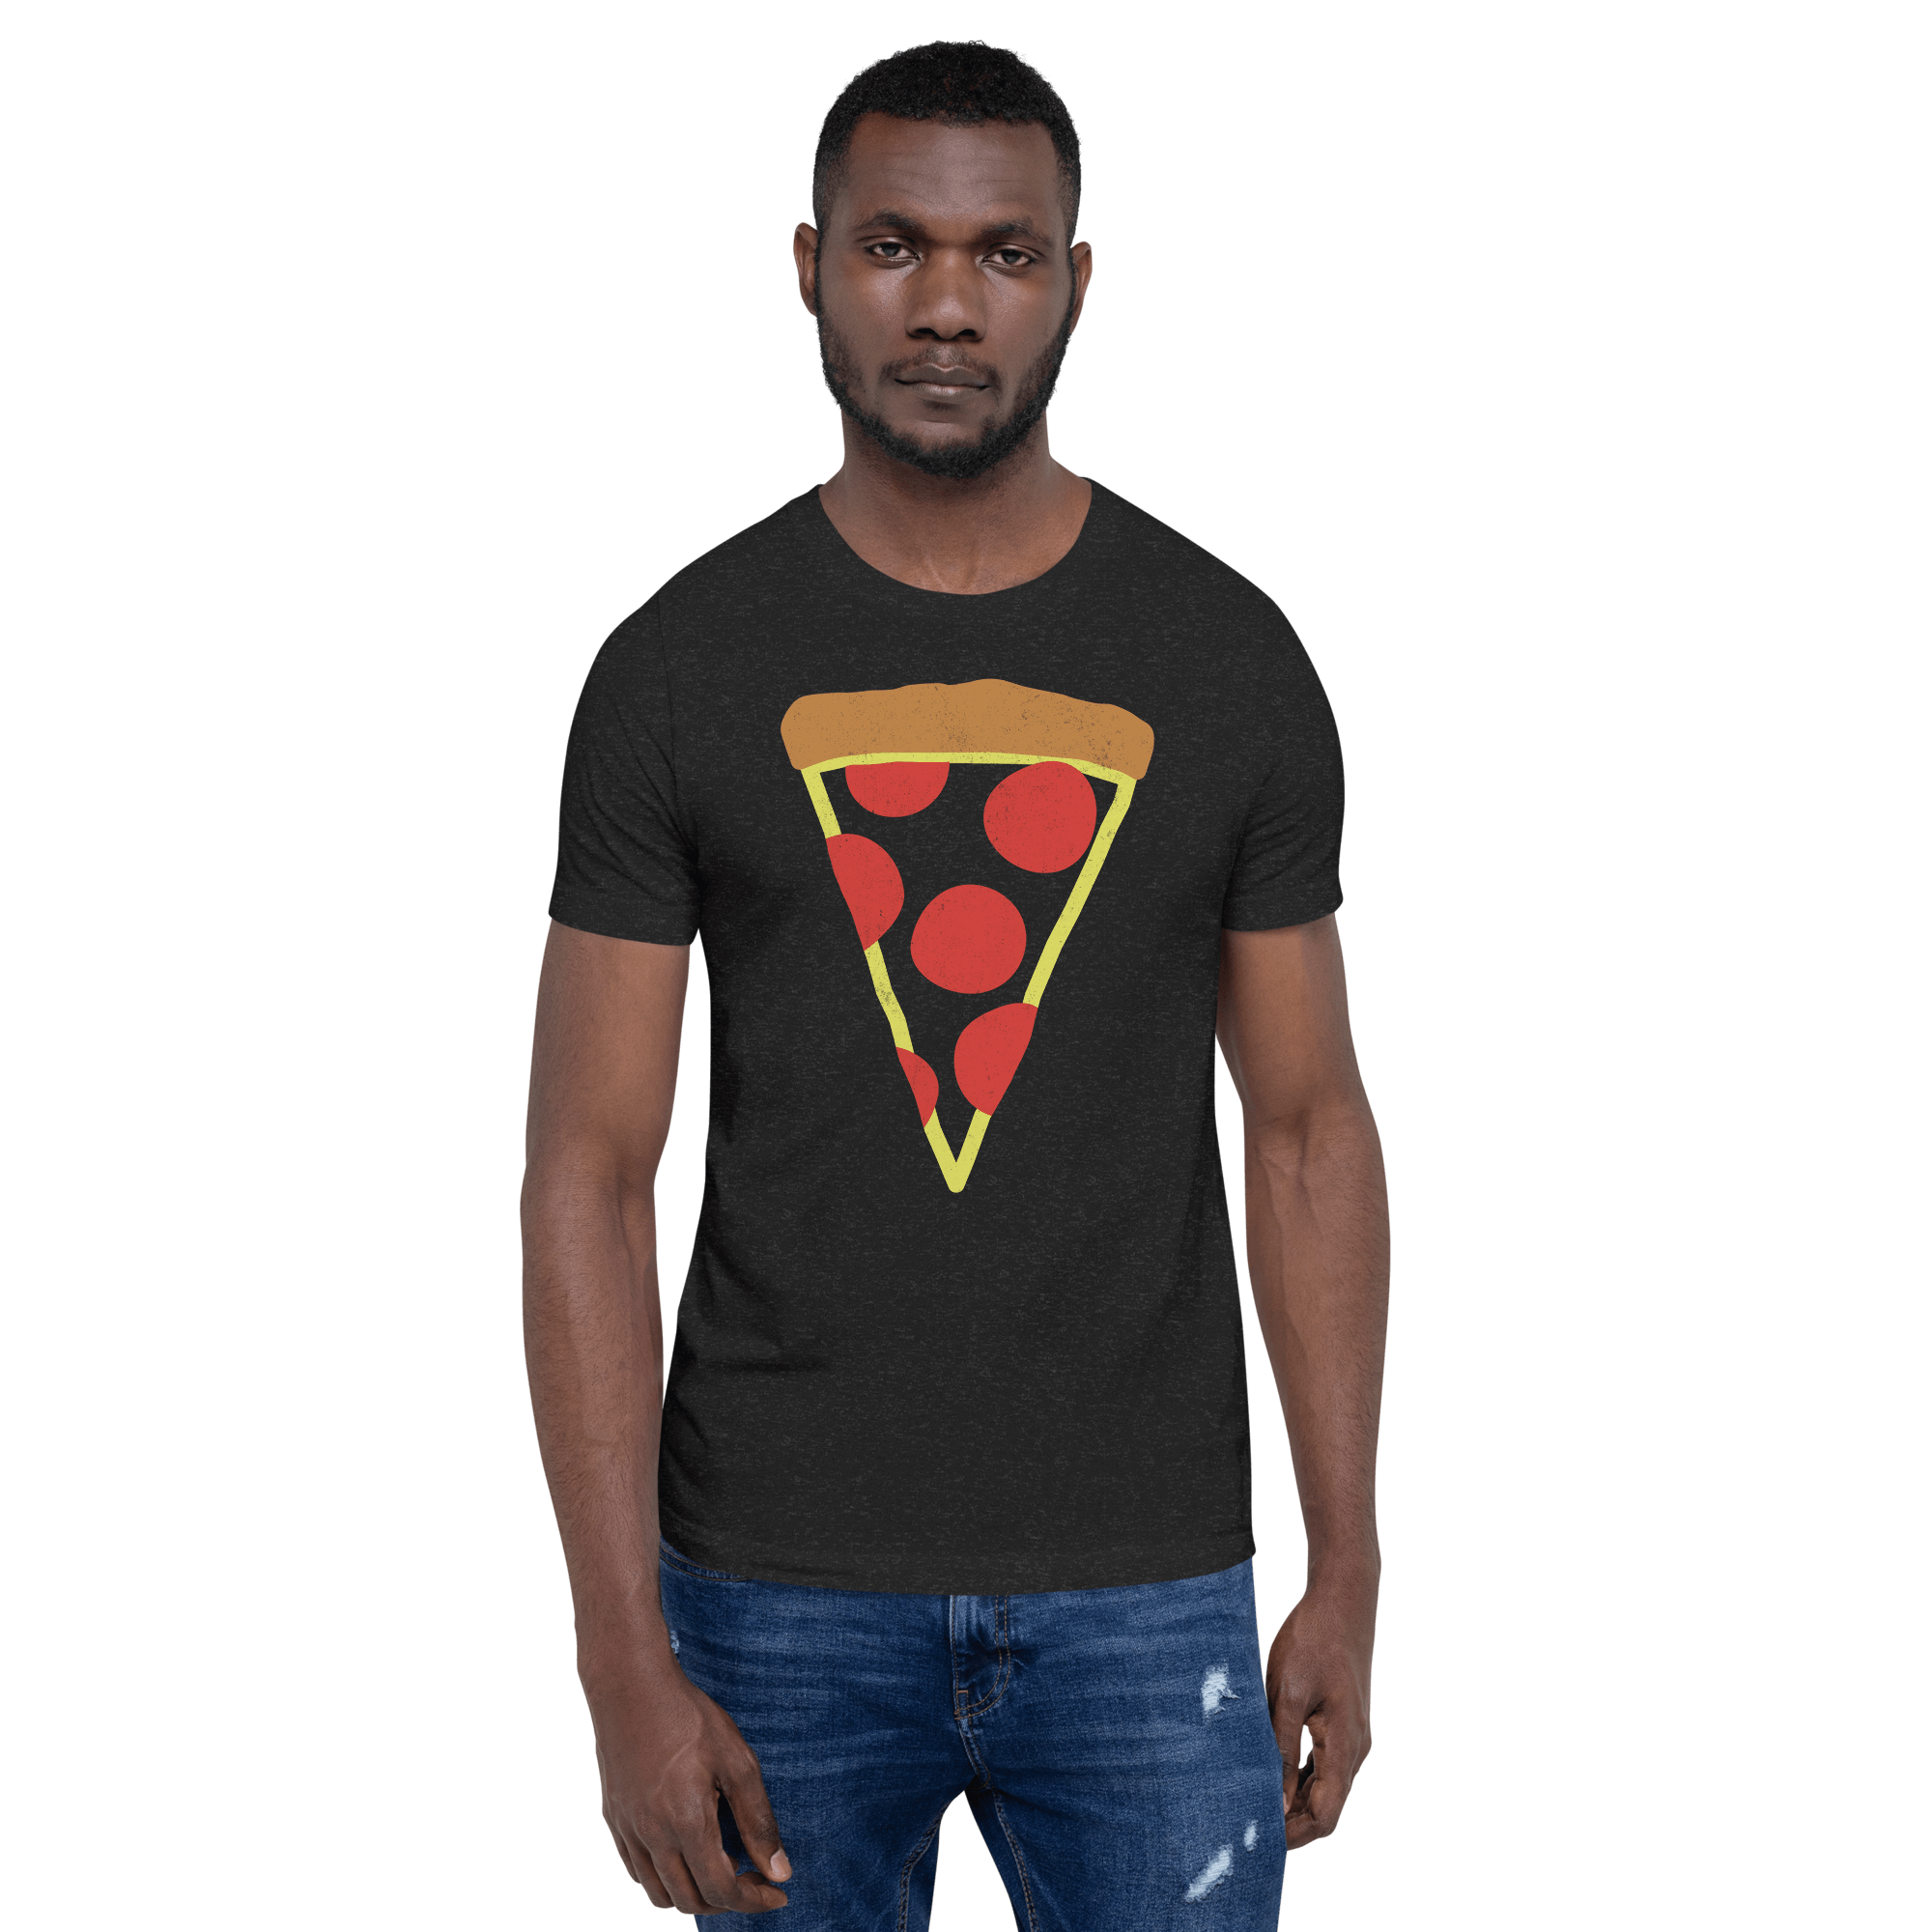 Pizza Slice Tee - Funny Foodie Graphic T-shirt | Evoke Apparel - front